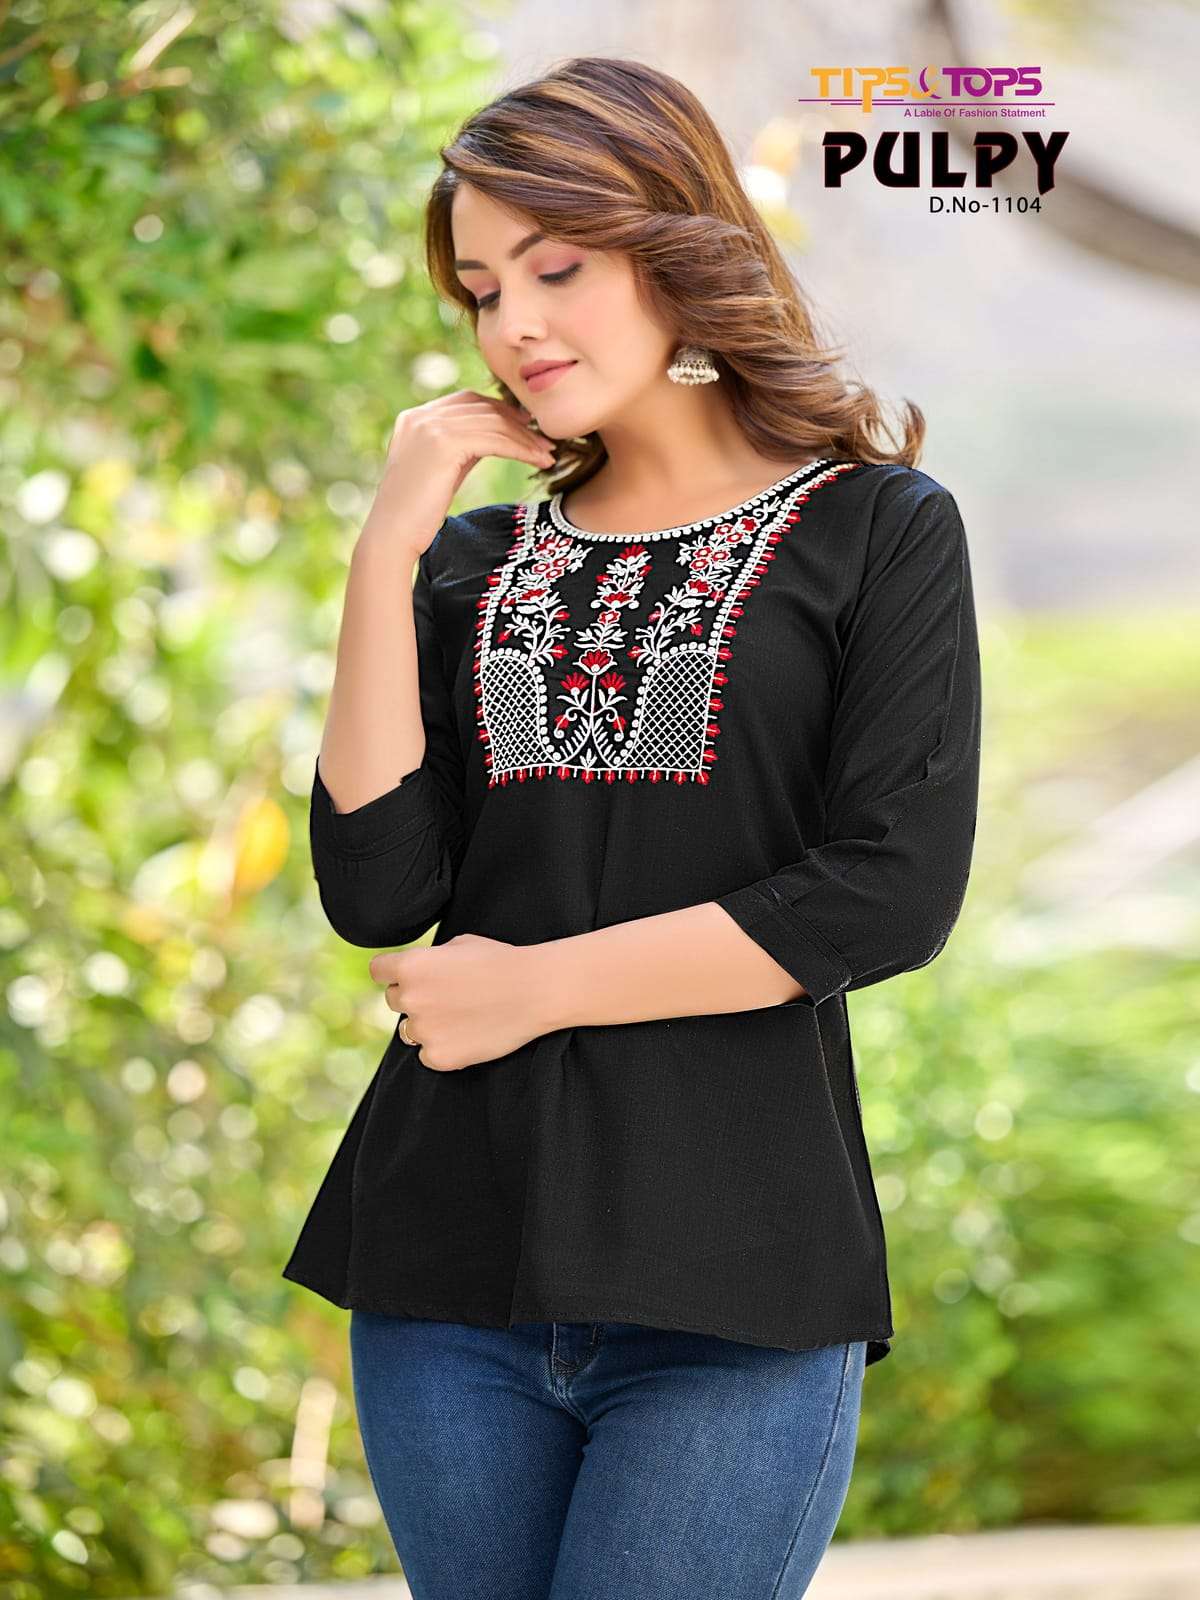 Tips & Tops Yami Catalog Embroidery Extraordinary Fancy Tops For Women